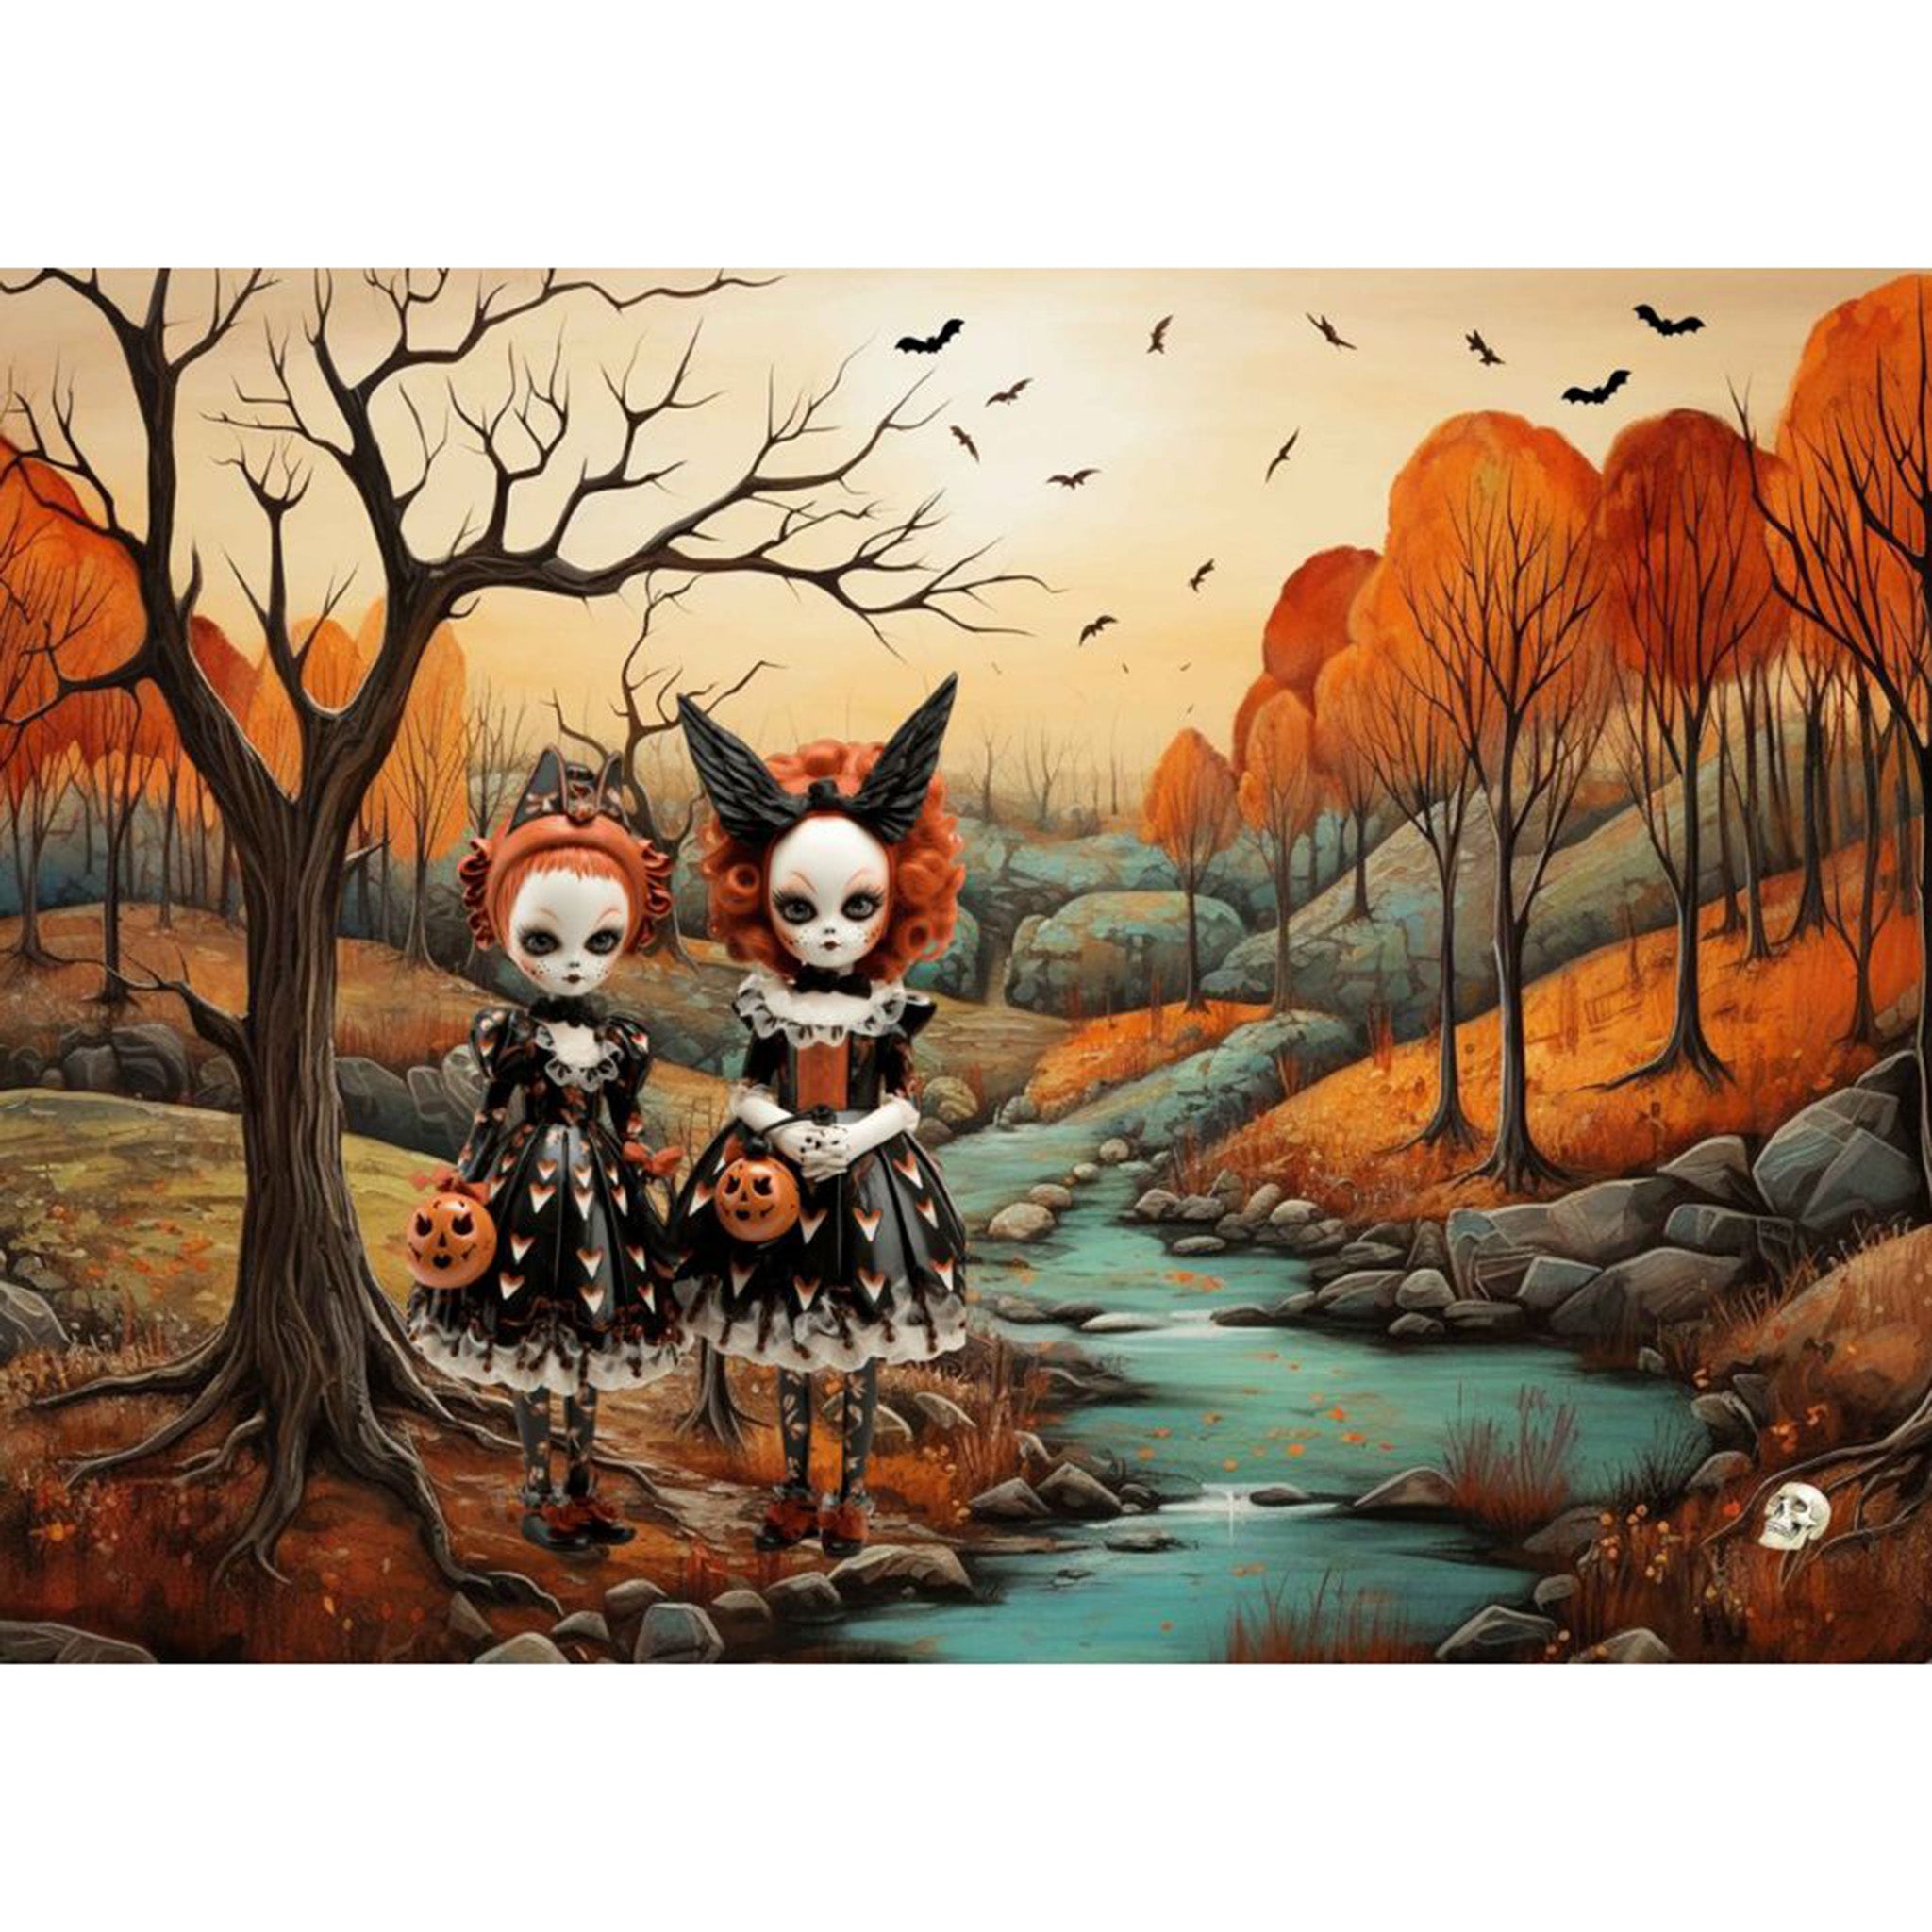 Tissue paper design that features two spooky witches dolls by the river with trees and fall leaves in the background while bats swoop overhead. White border are on top and bottom.